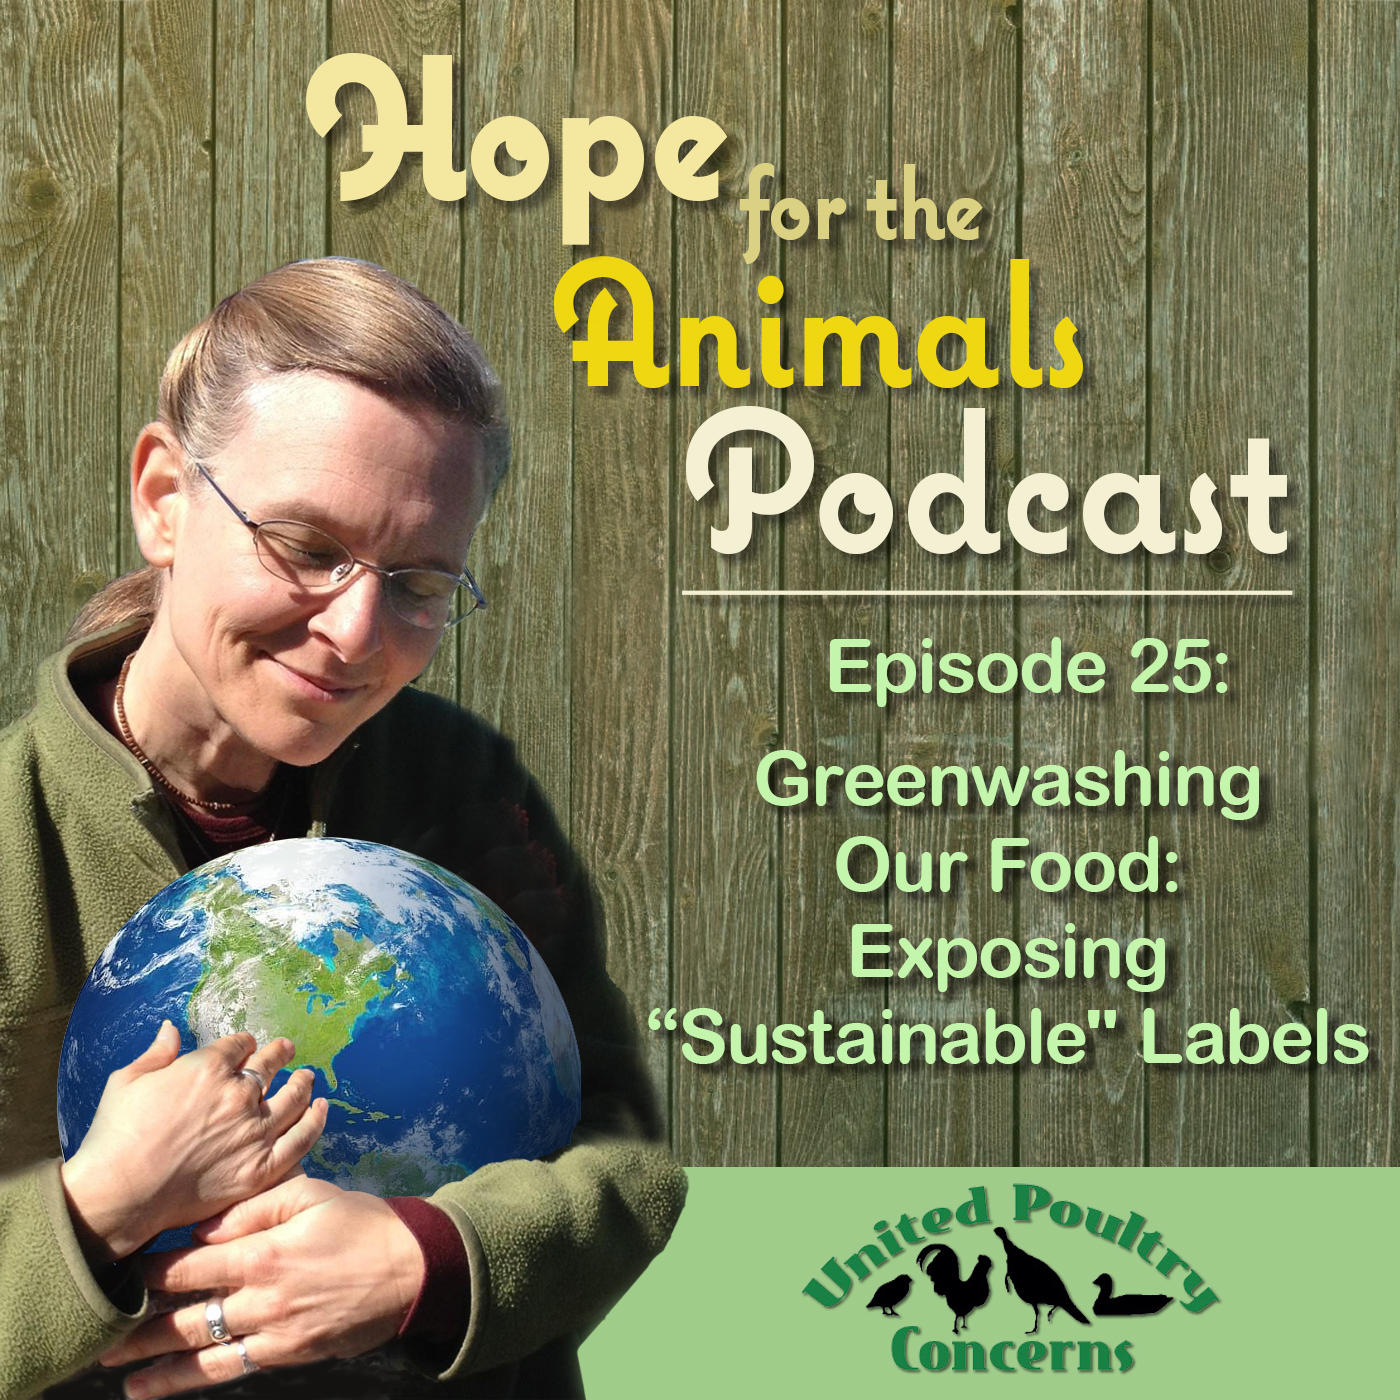 Episode 25: Greenwashing Our Food: Exposing “Sustainable” Labels